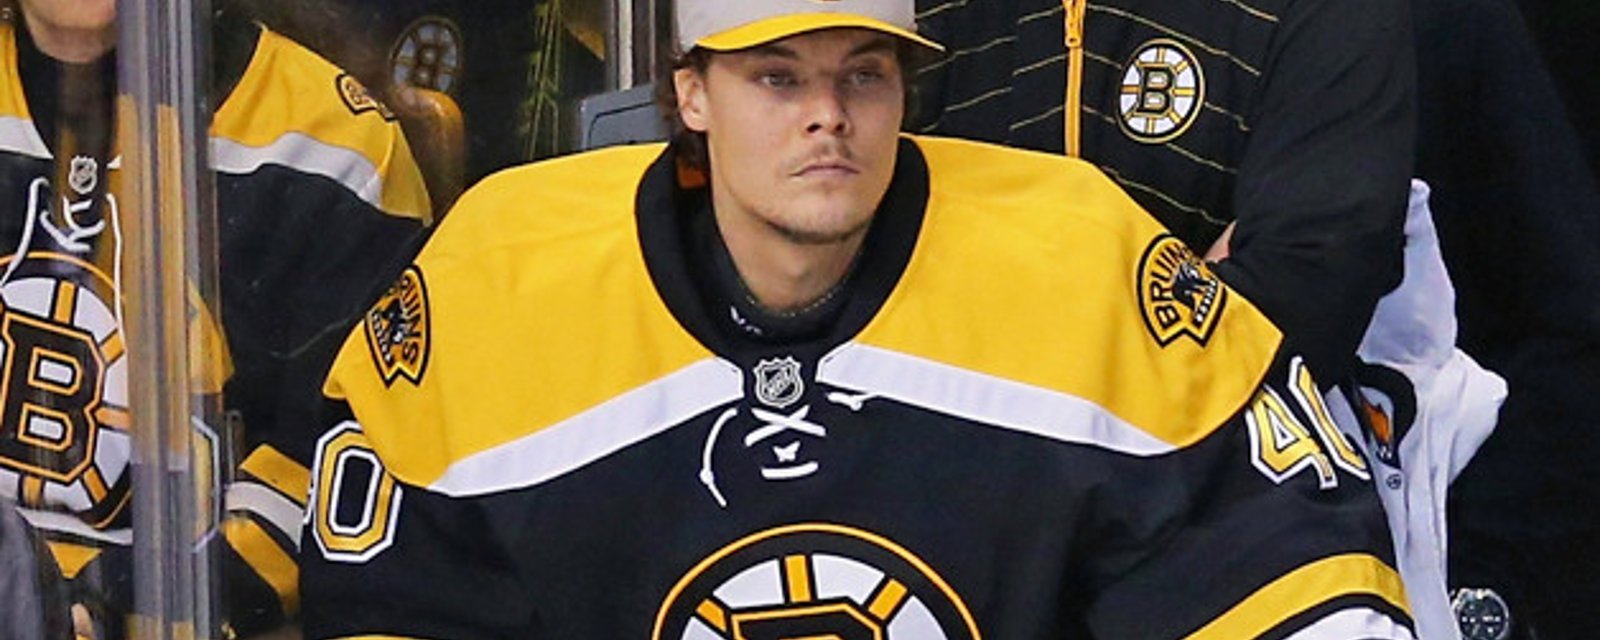 Tuukka Rask will be suspended by the NHL